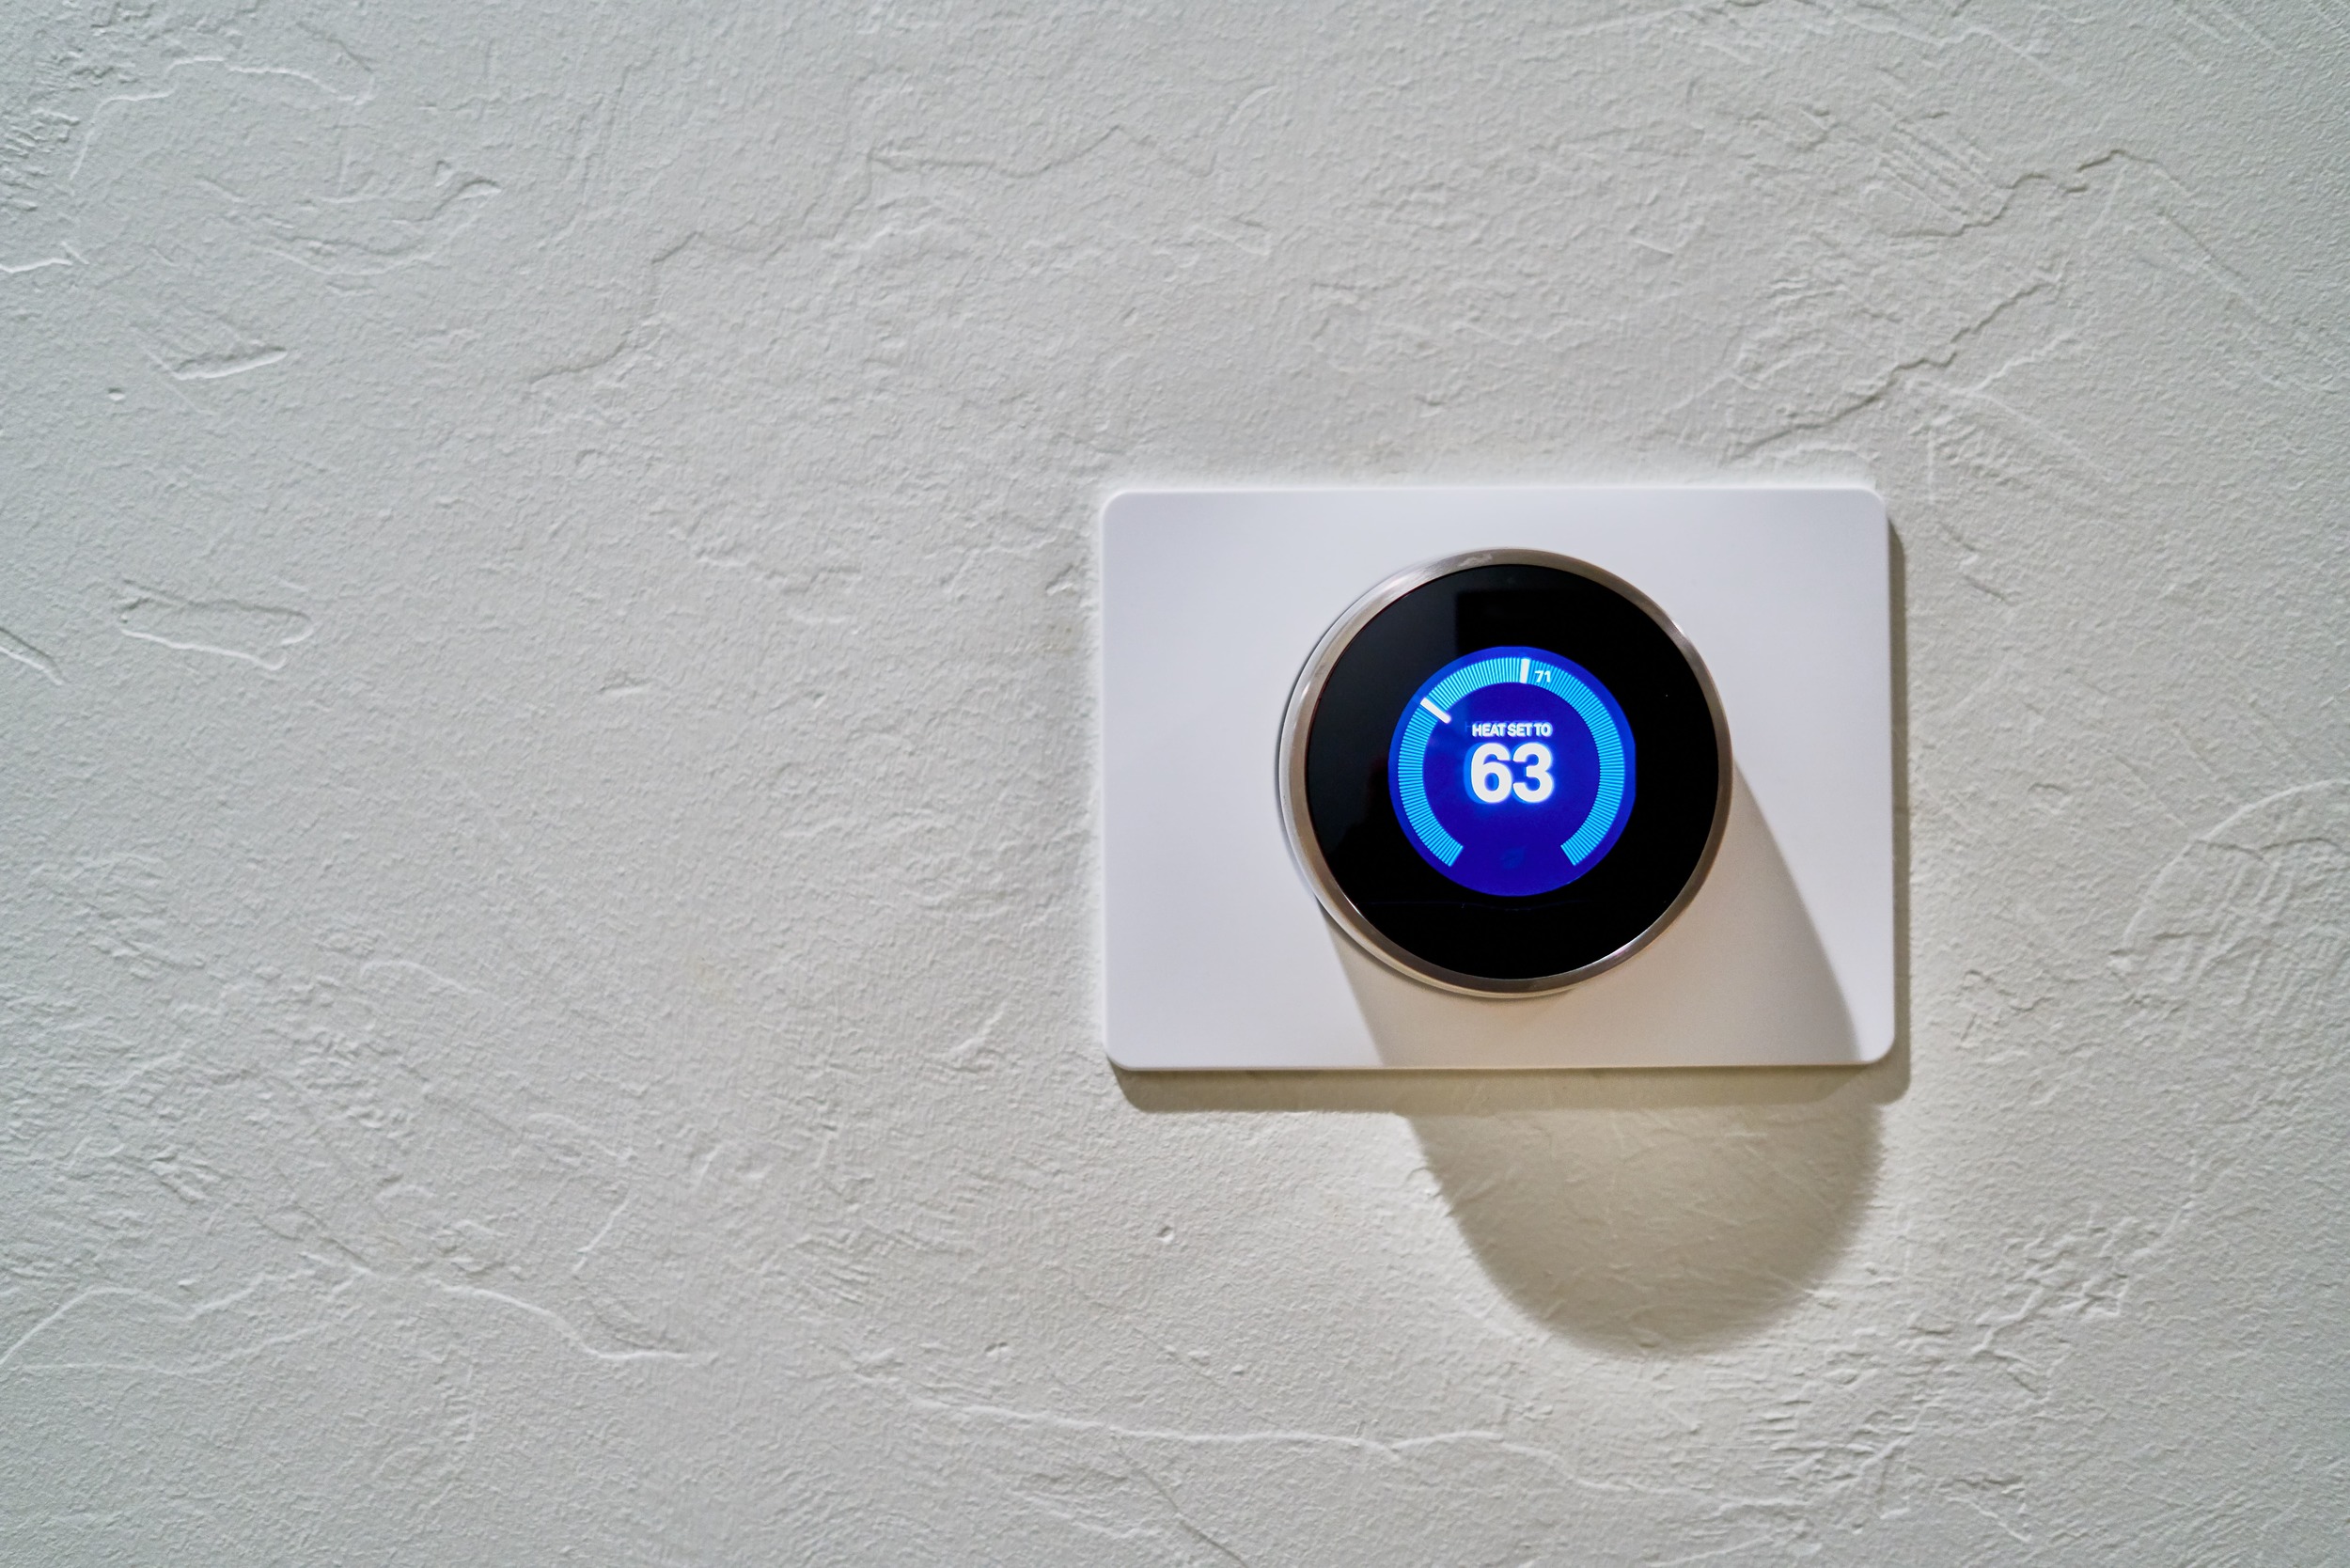 Down the Rabbit Hole of Smart Home Tech